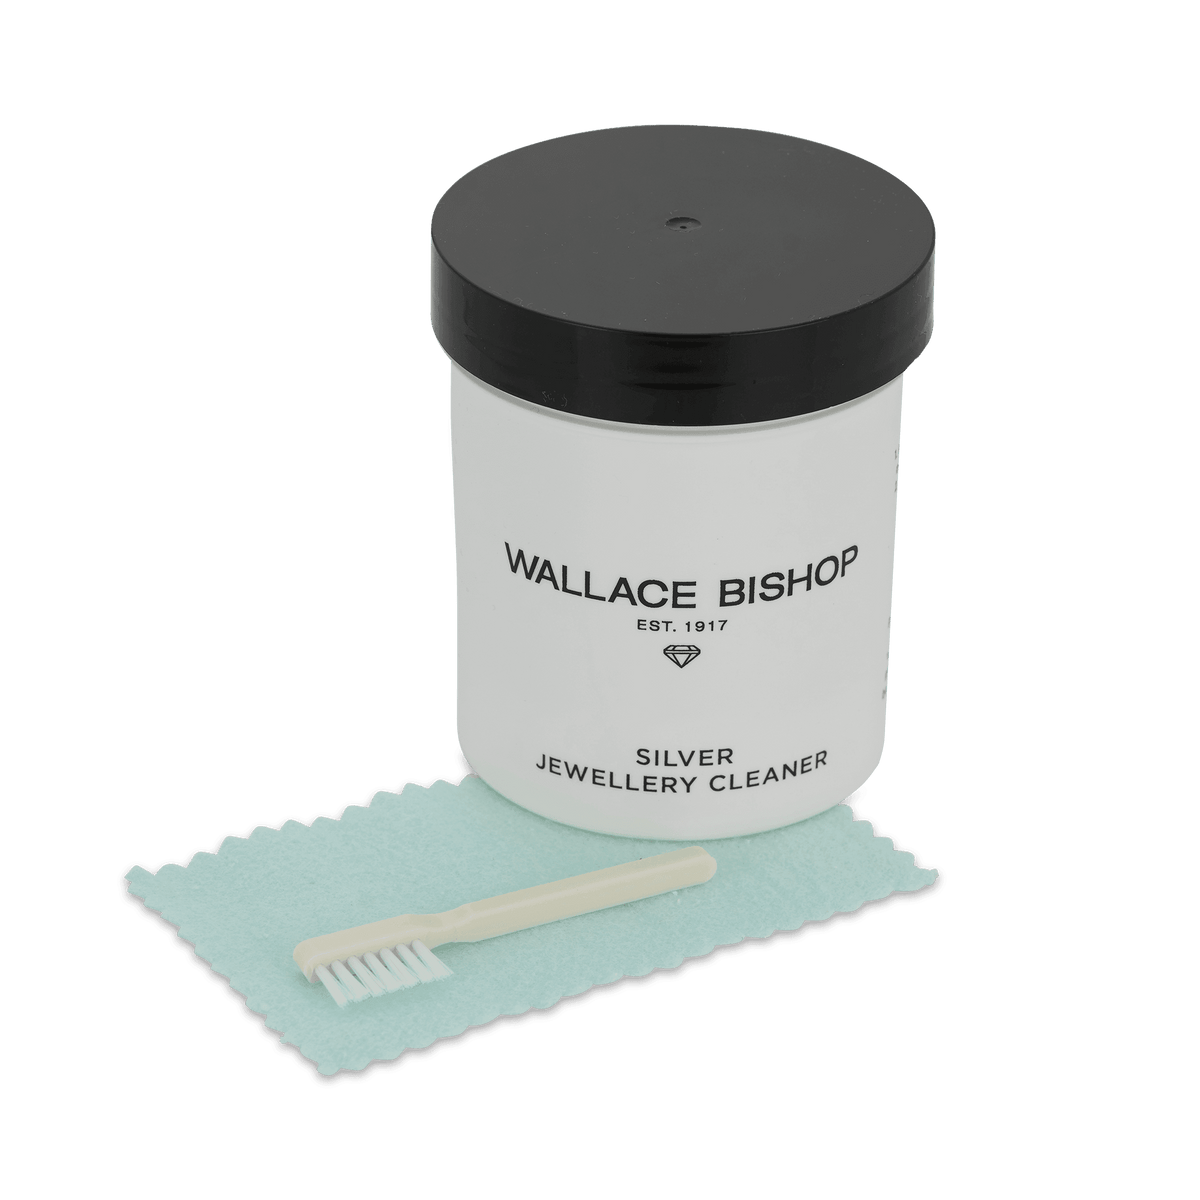 Silver Jewellery Cleaner - Wallace Bishop